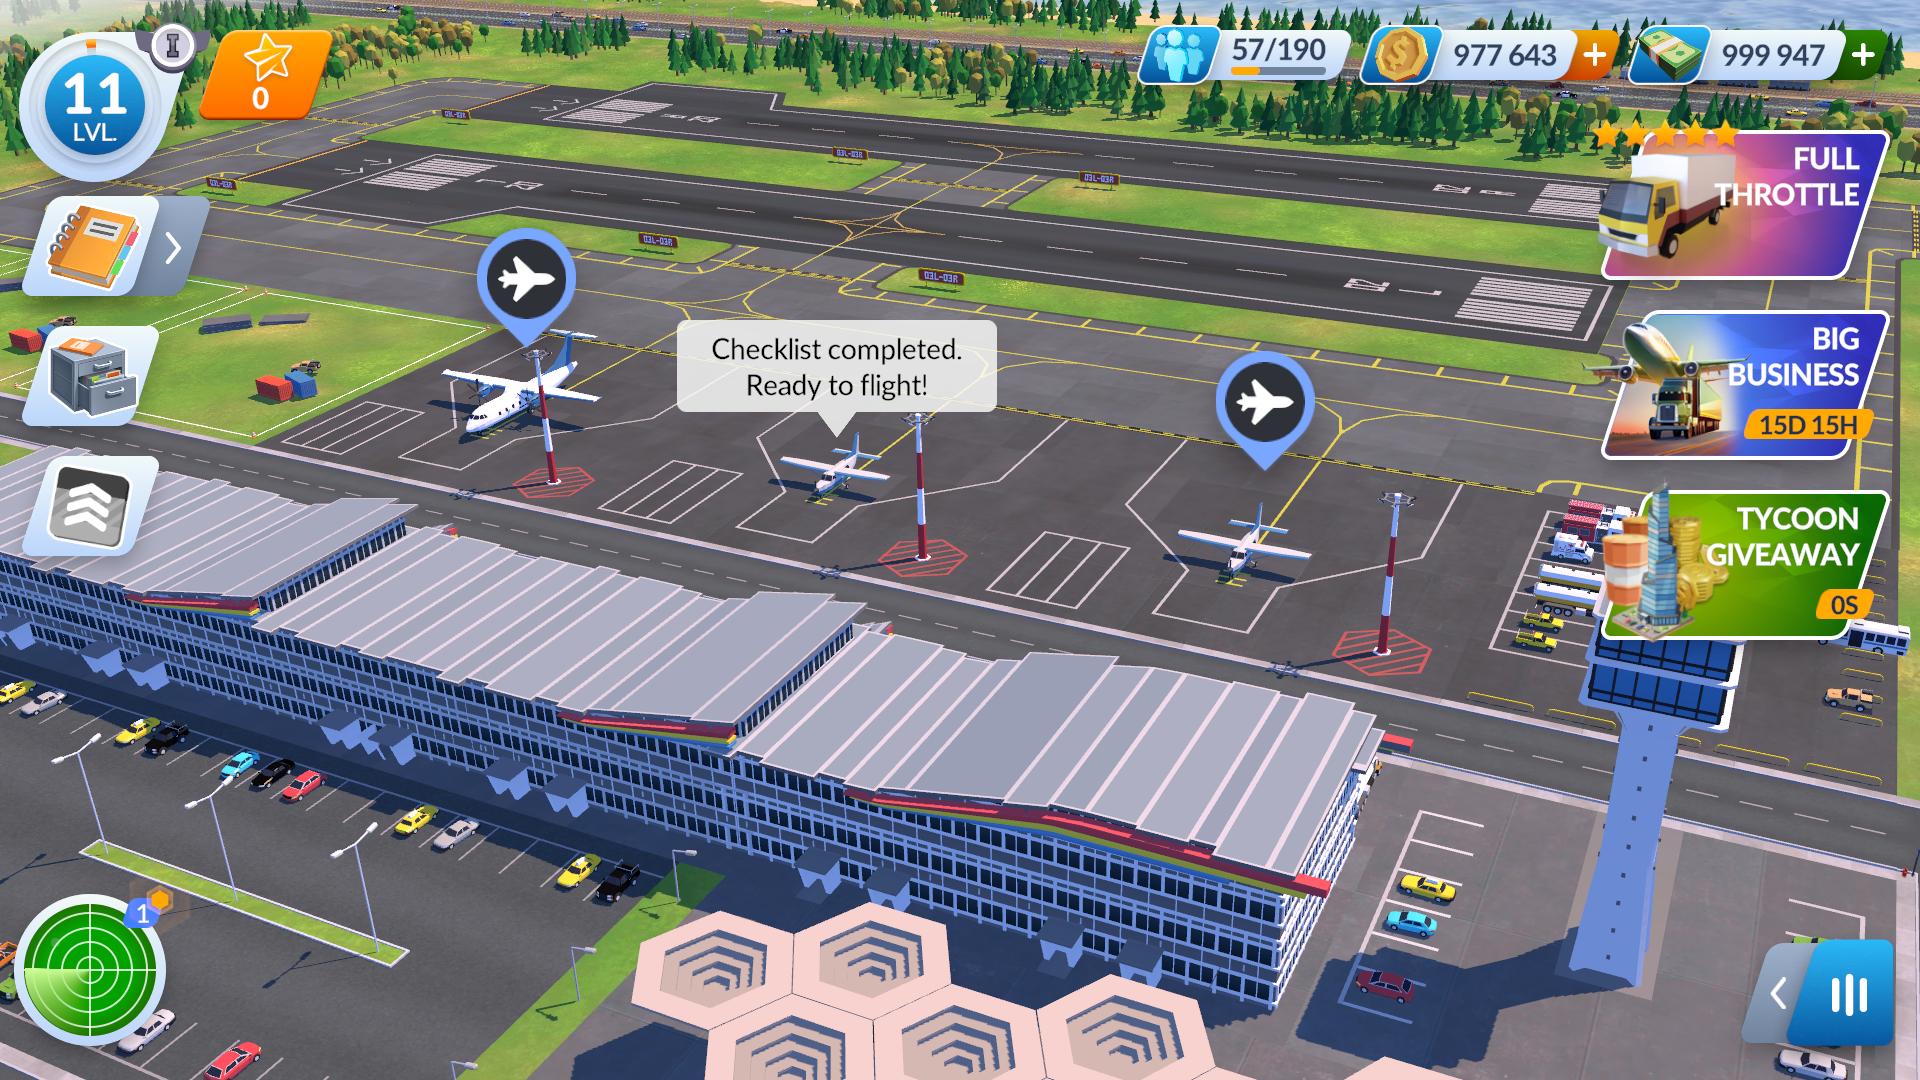 Download Transport Manager Tycoon für Android A.n.d.r.o.i.d. .5...0. .a.n.d. .m.o.r.e kostenlos.